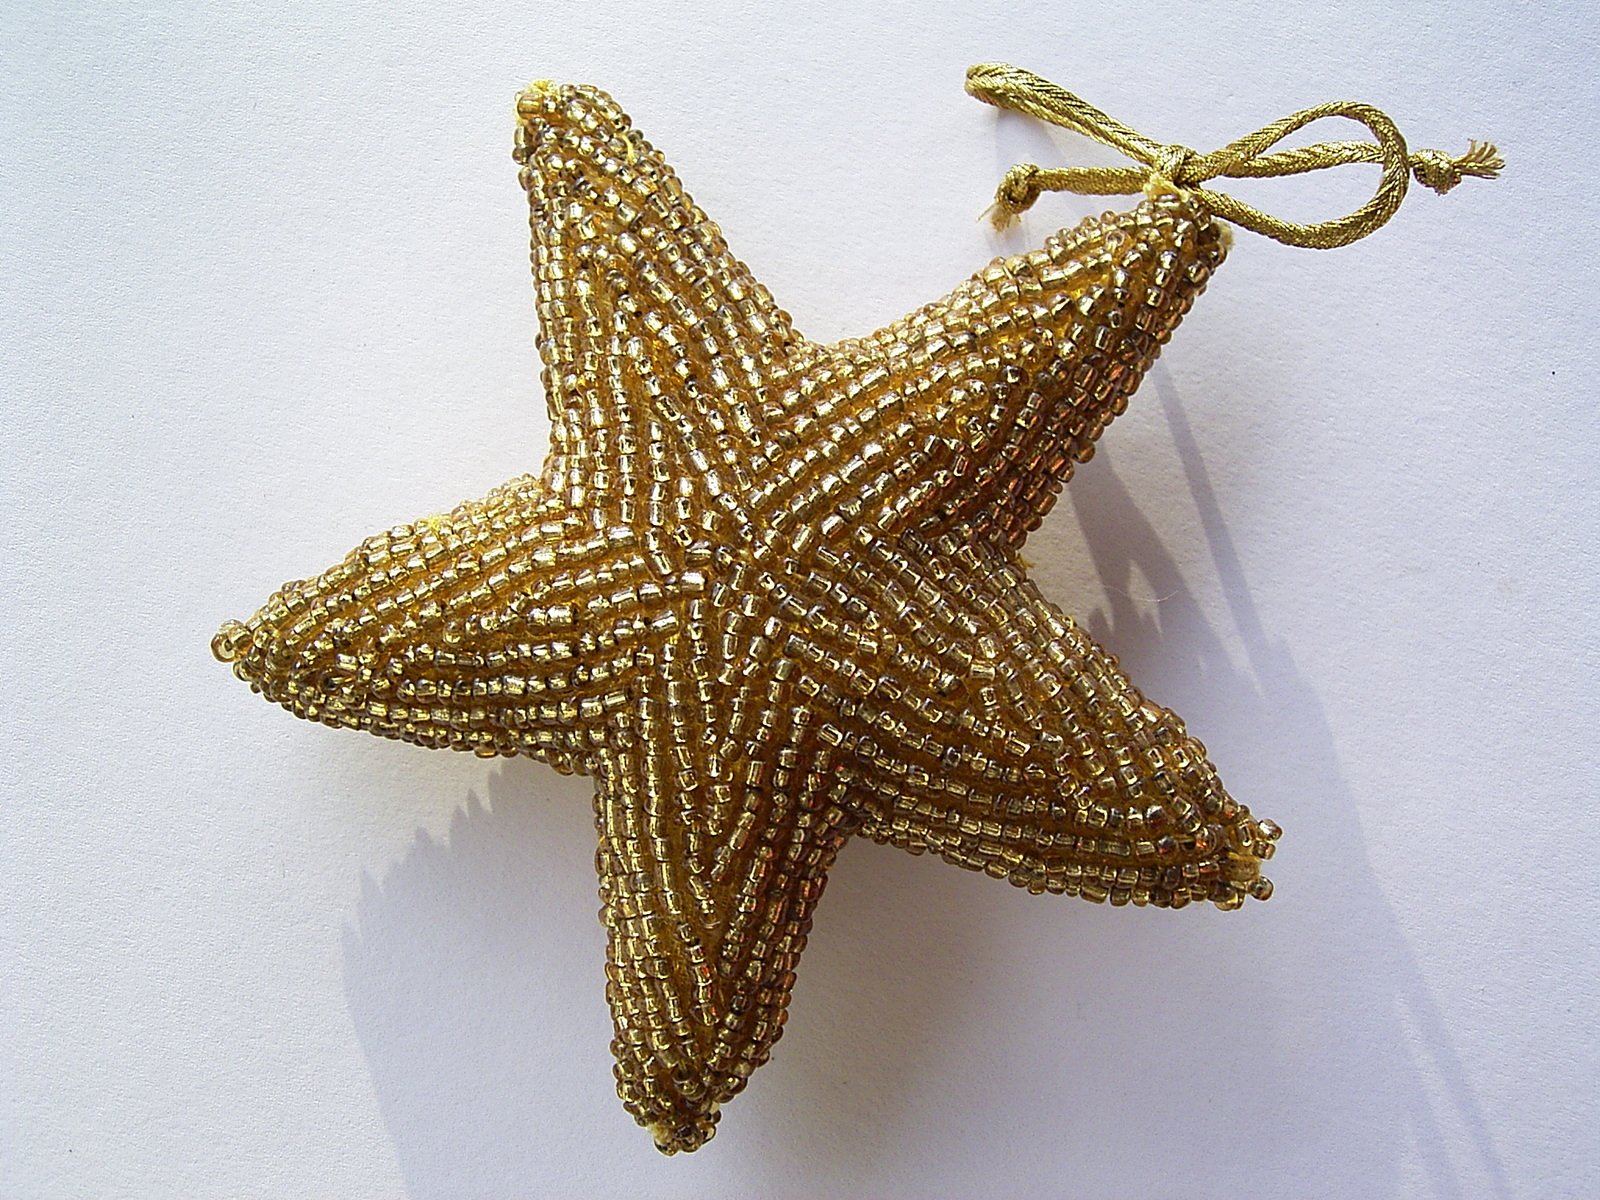 a gold ornament that is hanging on the wall